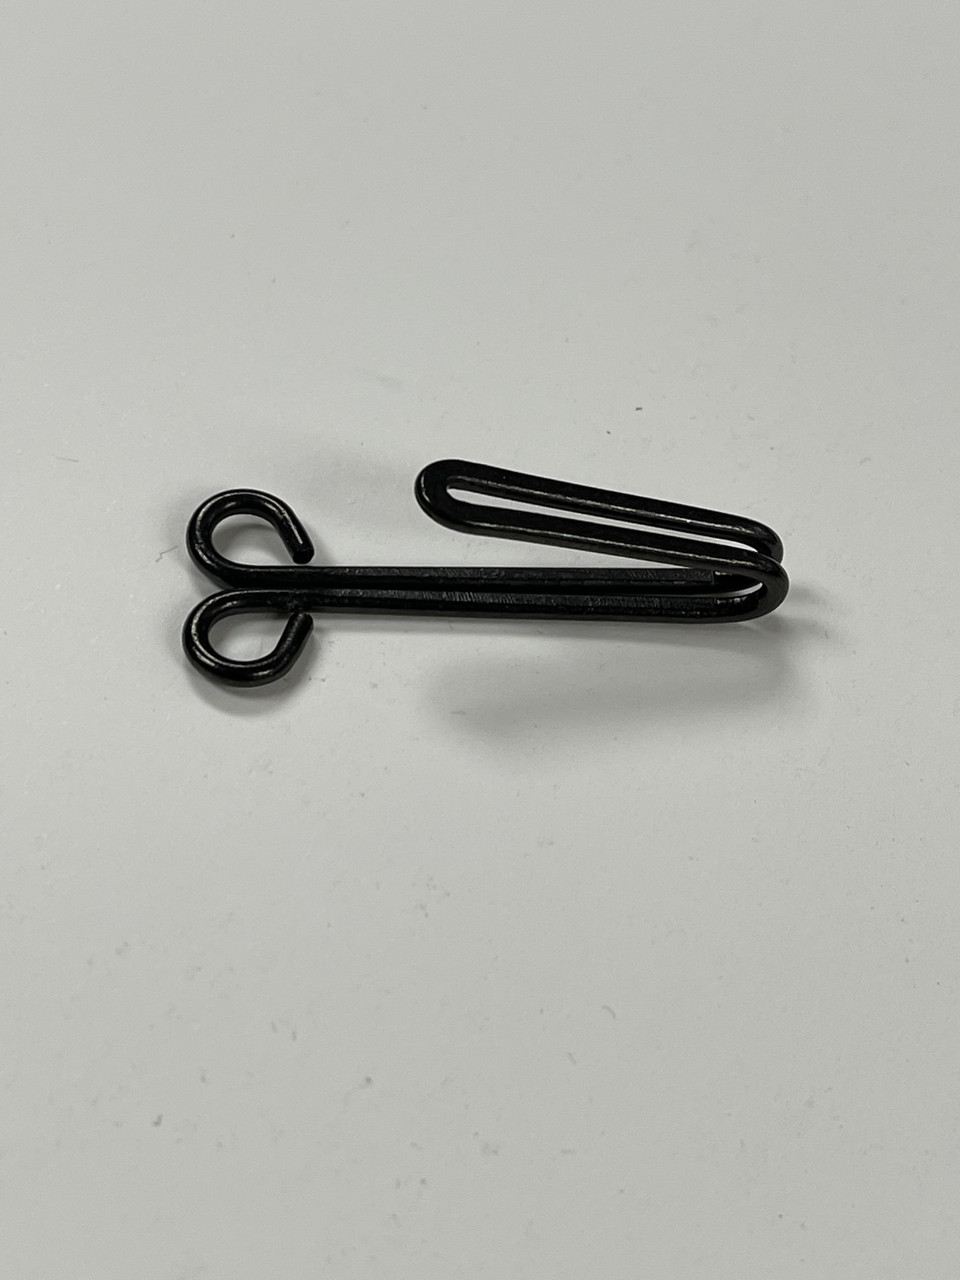 Fasteners, Clips, S-Hooks, & More 